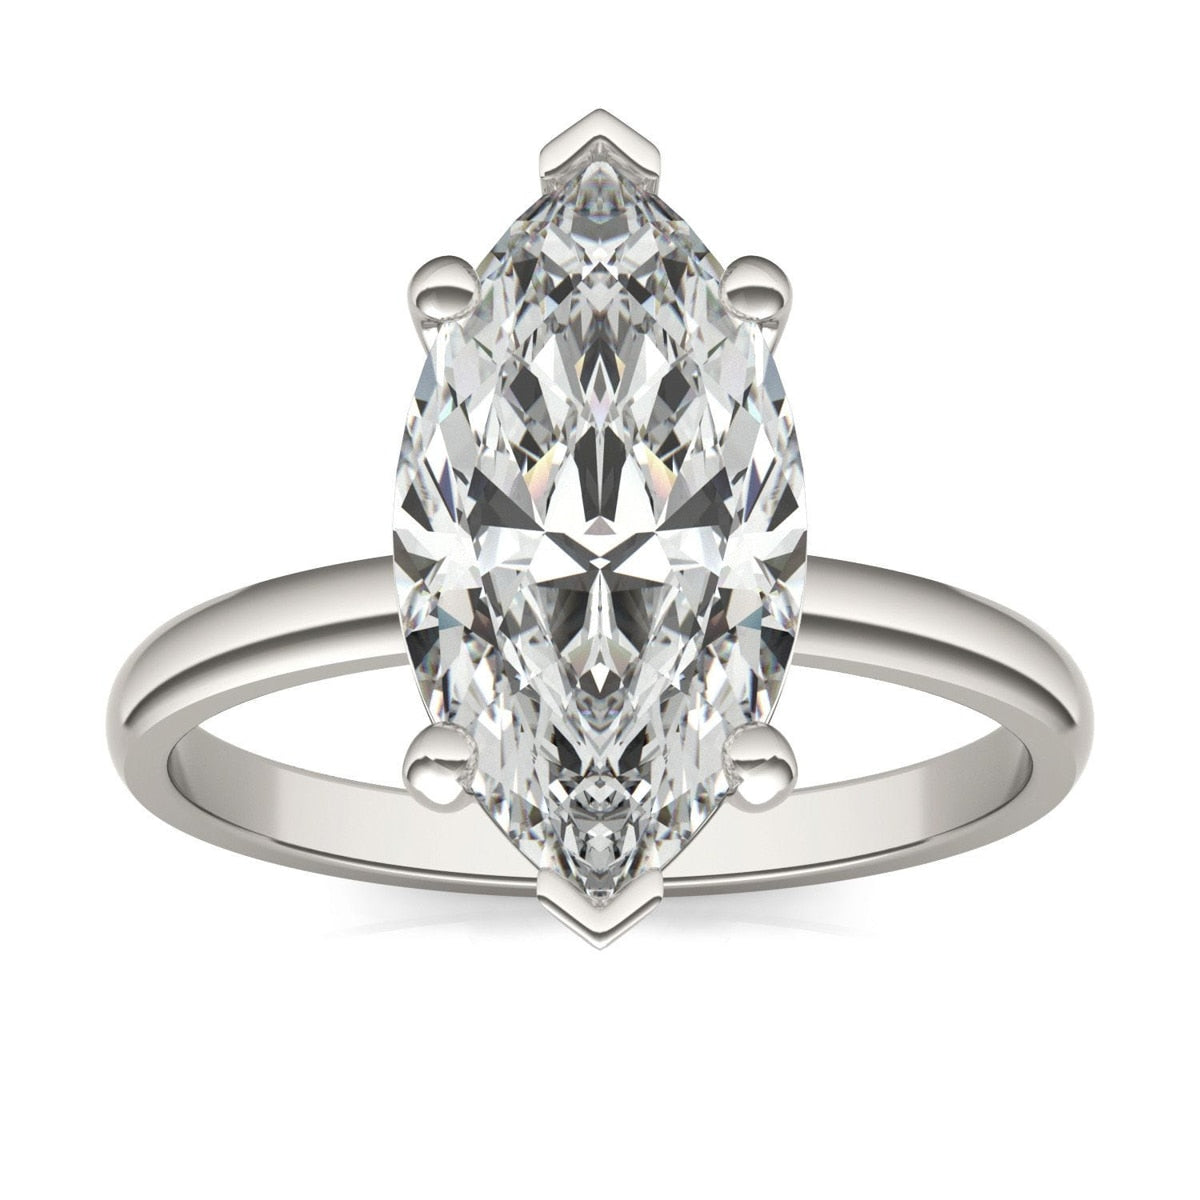 3 Carat Marquise Cut Moissanite Diamond Ring Sterling Silver